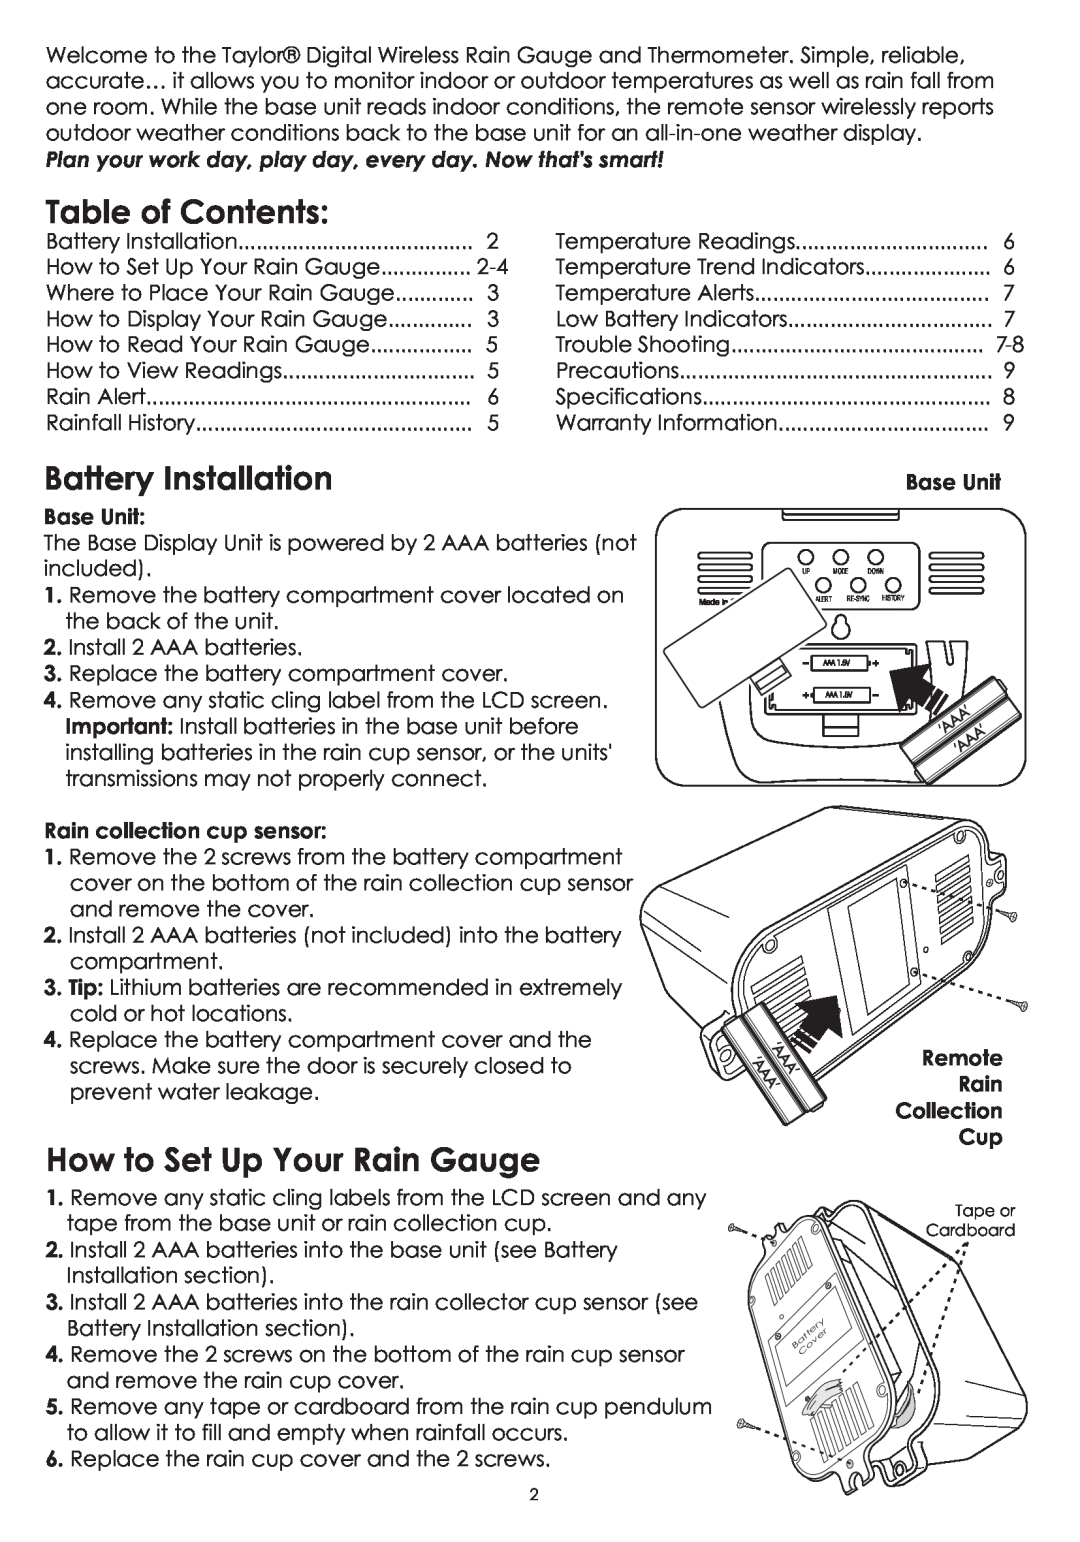 Taylor 2753 instruction manual Table of Contents, Battery Installation, How to Set Up Your Rain Gauge 